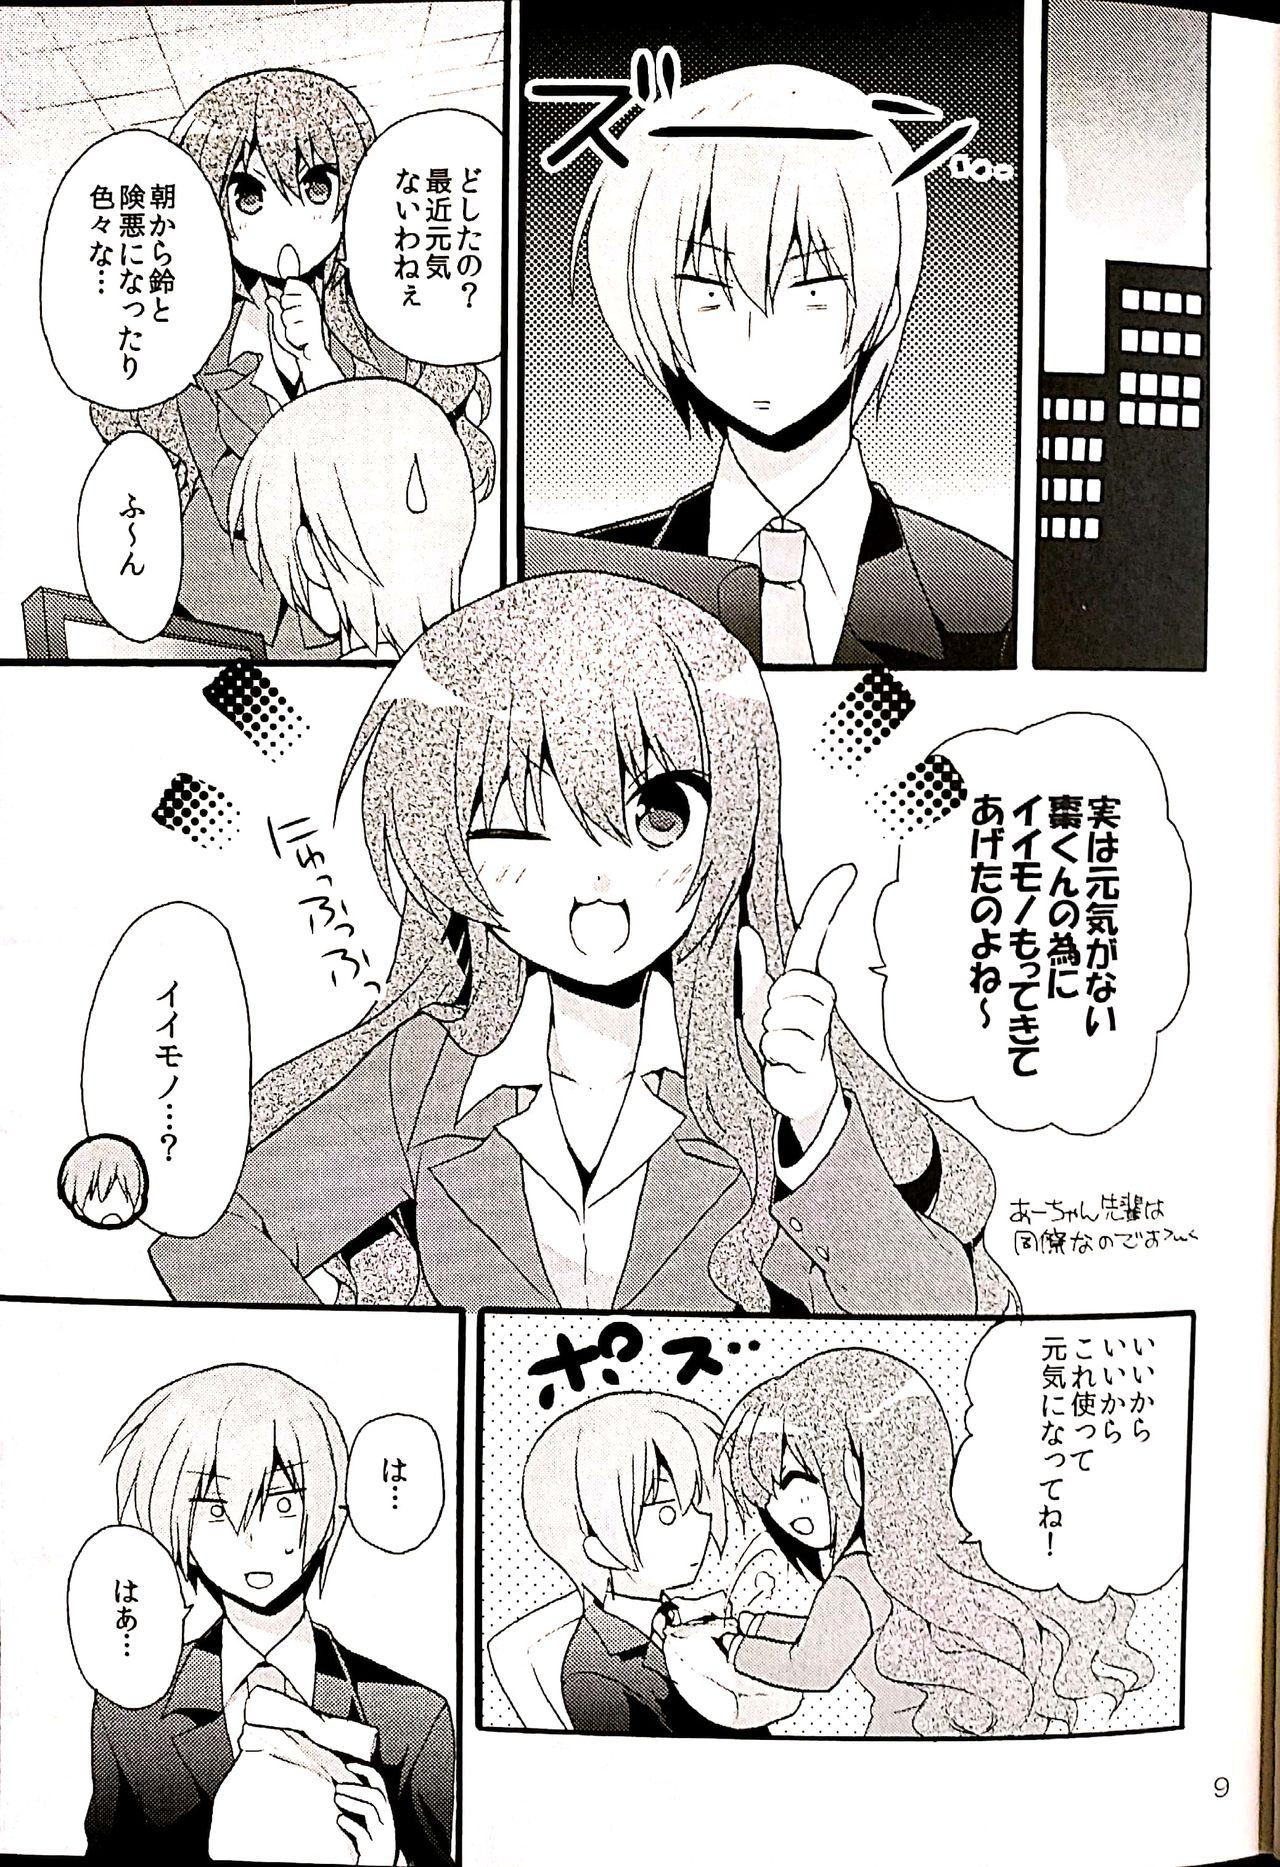 Best Blowjob Sister Complex! - Little busters Cunt - Page 6